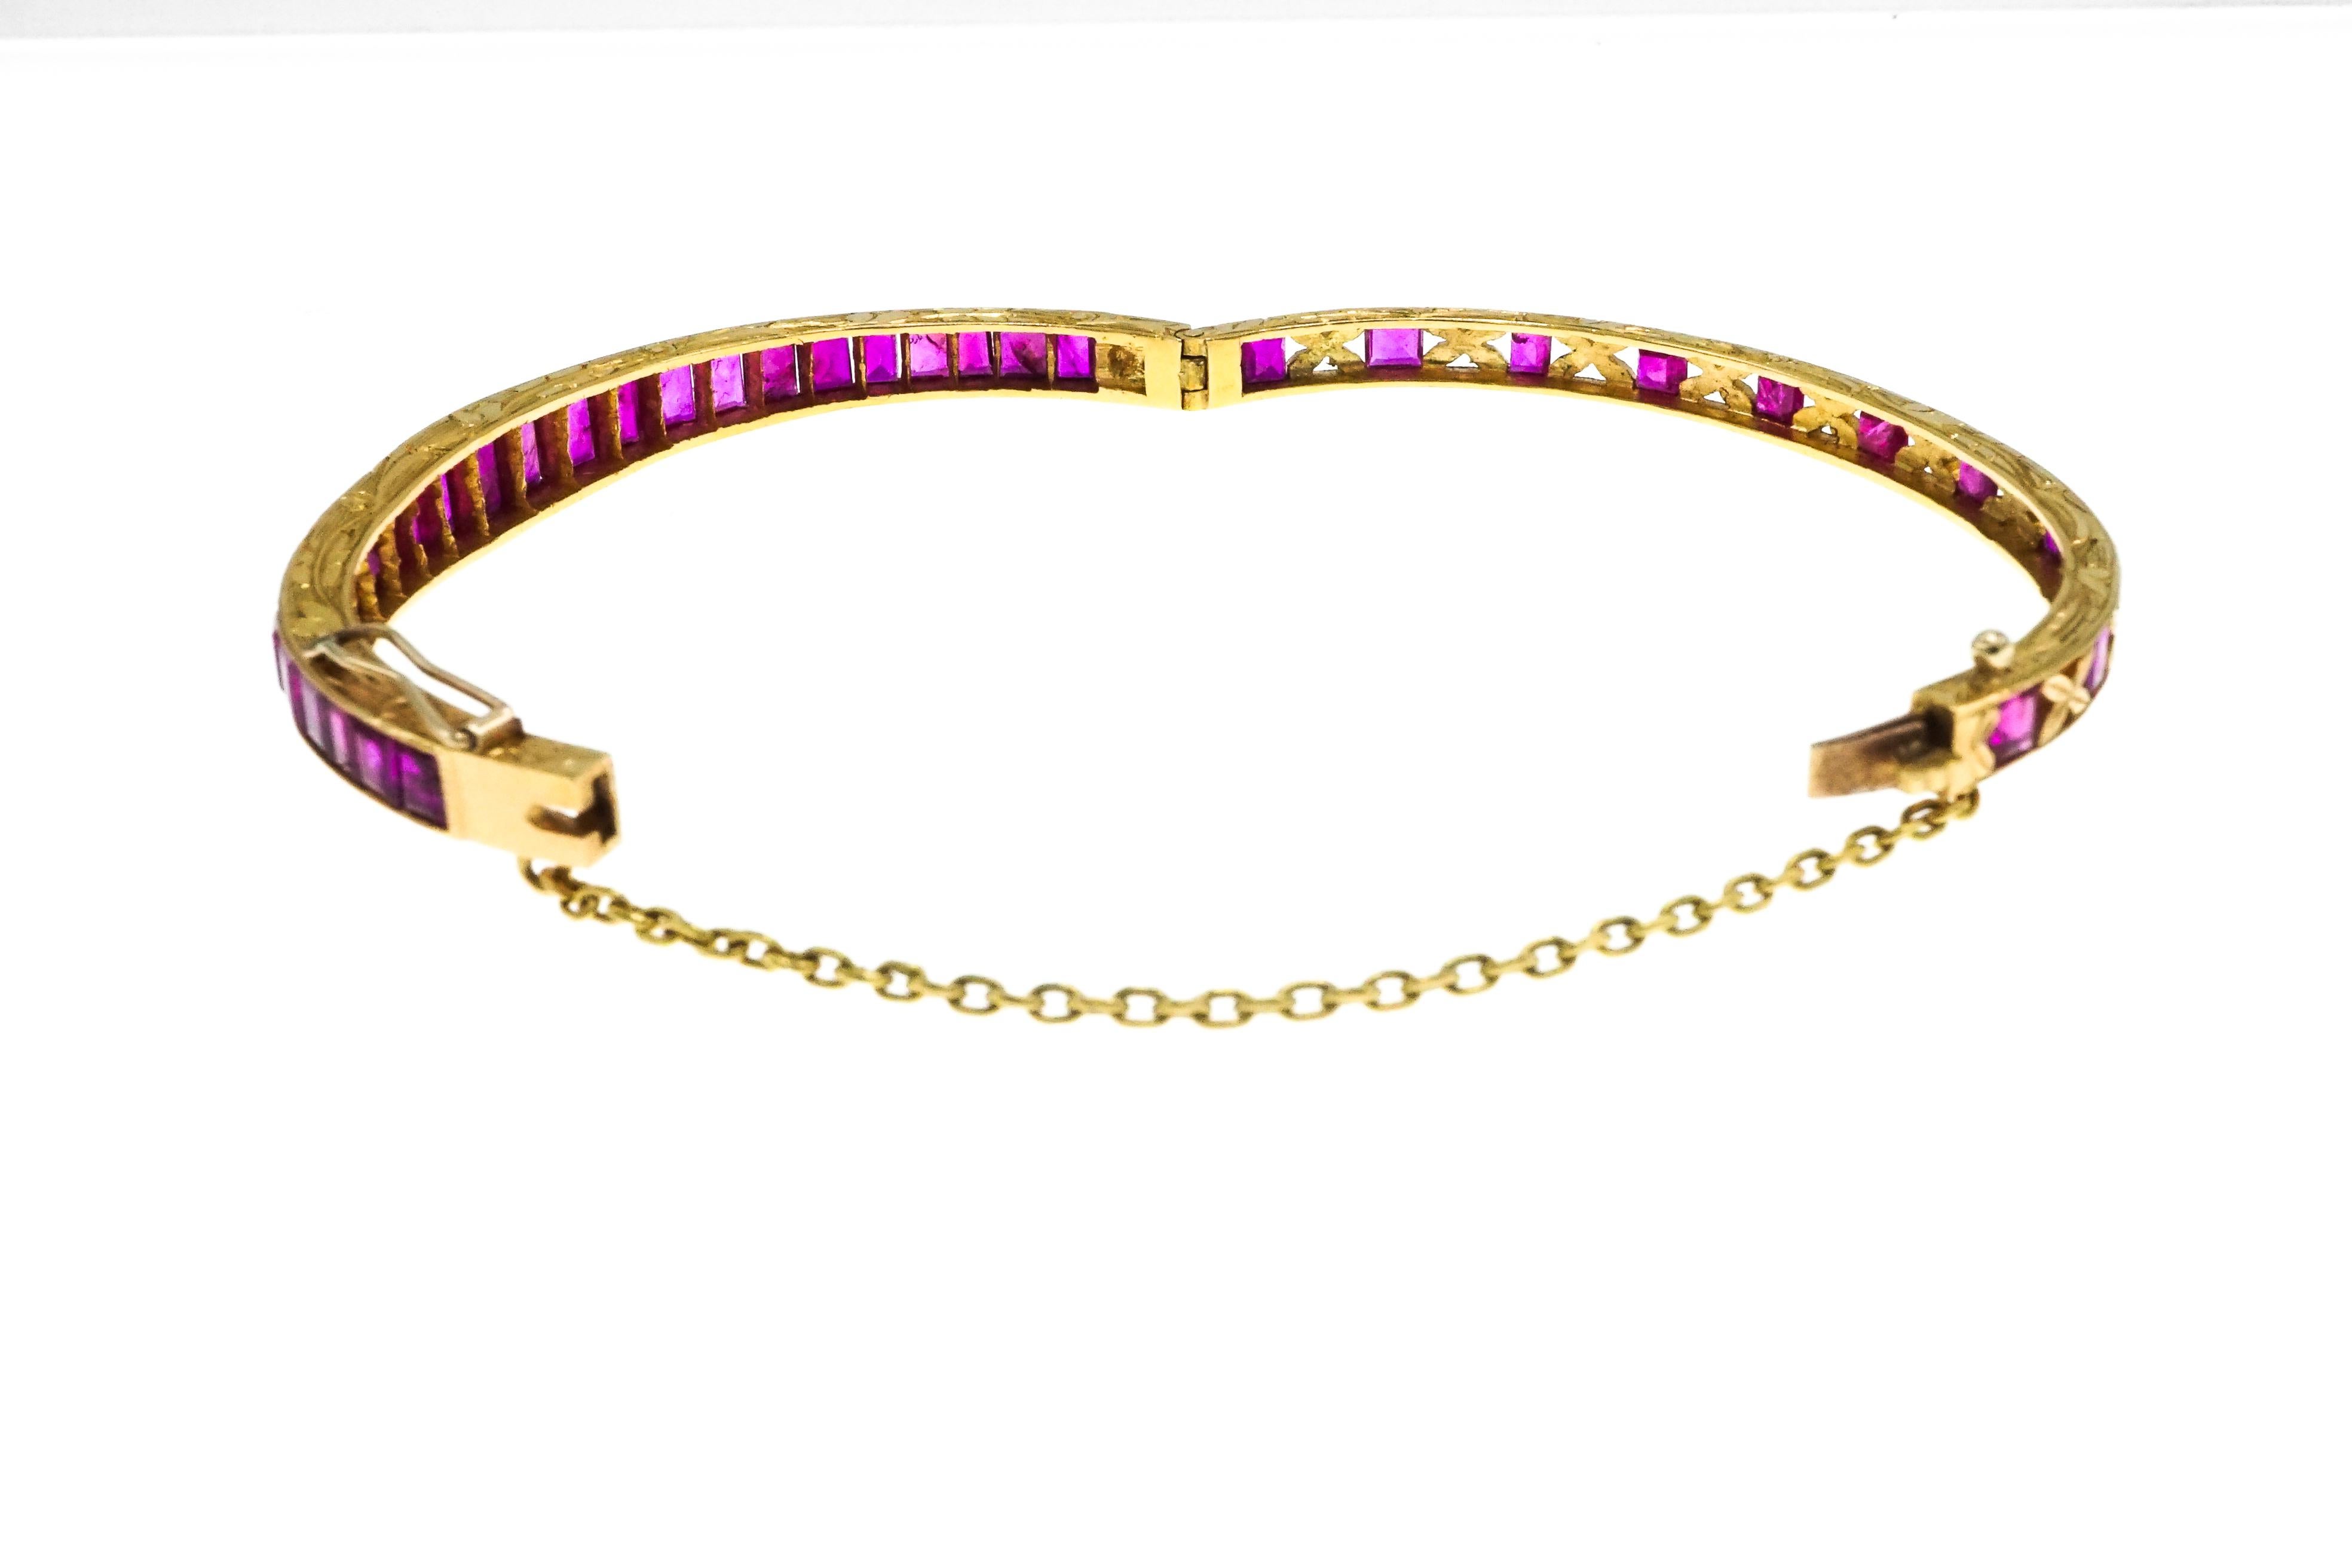 Gold and Ruby Bangle Bracelet In Excellent Condition For Sale In New York, NY